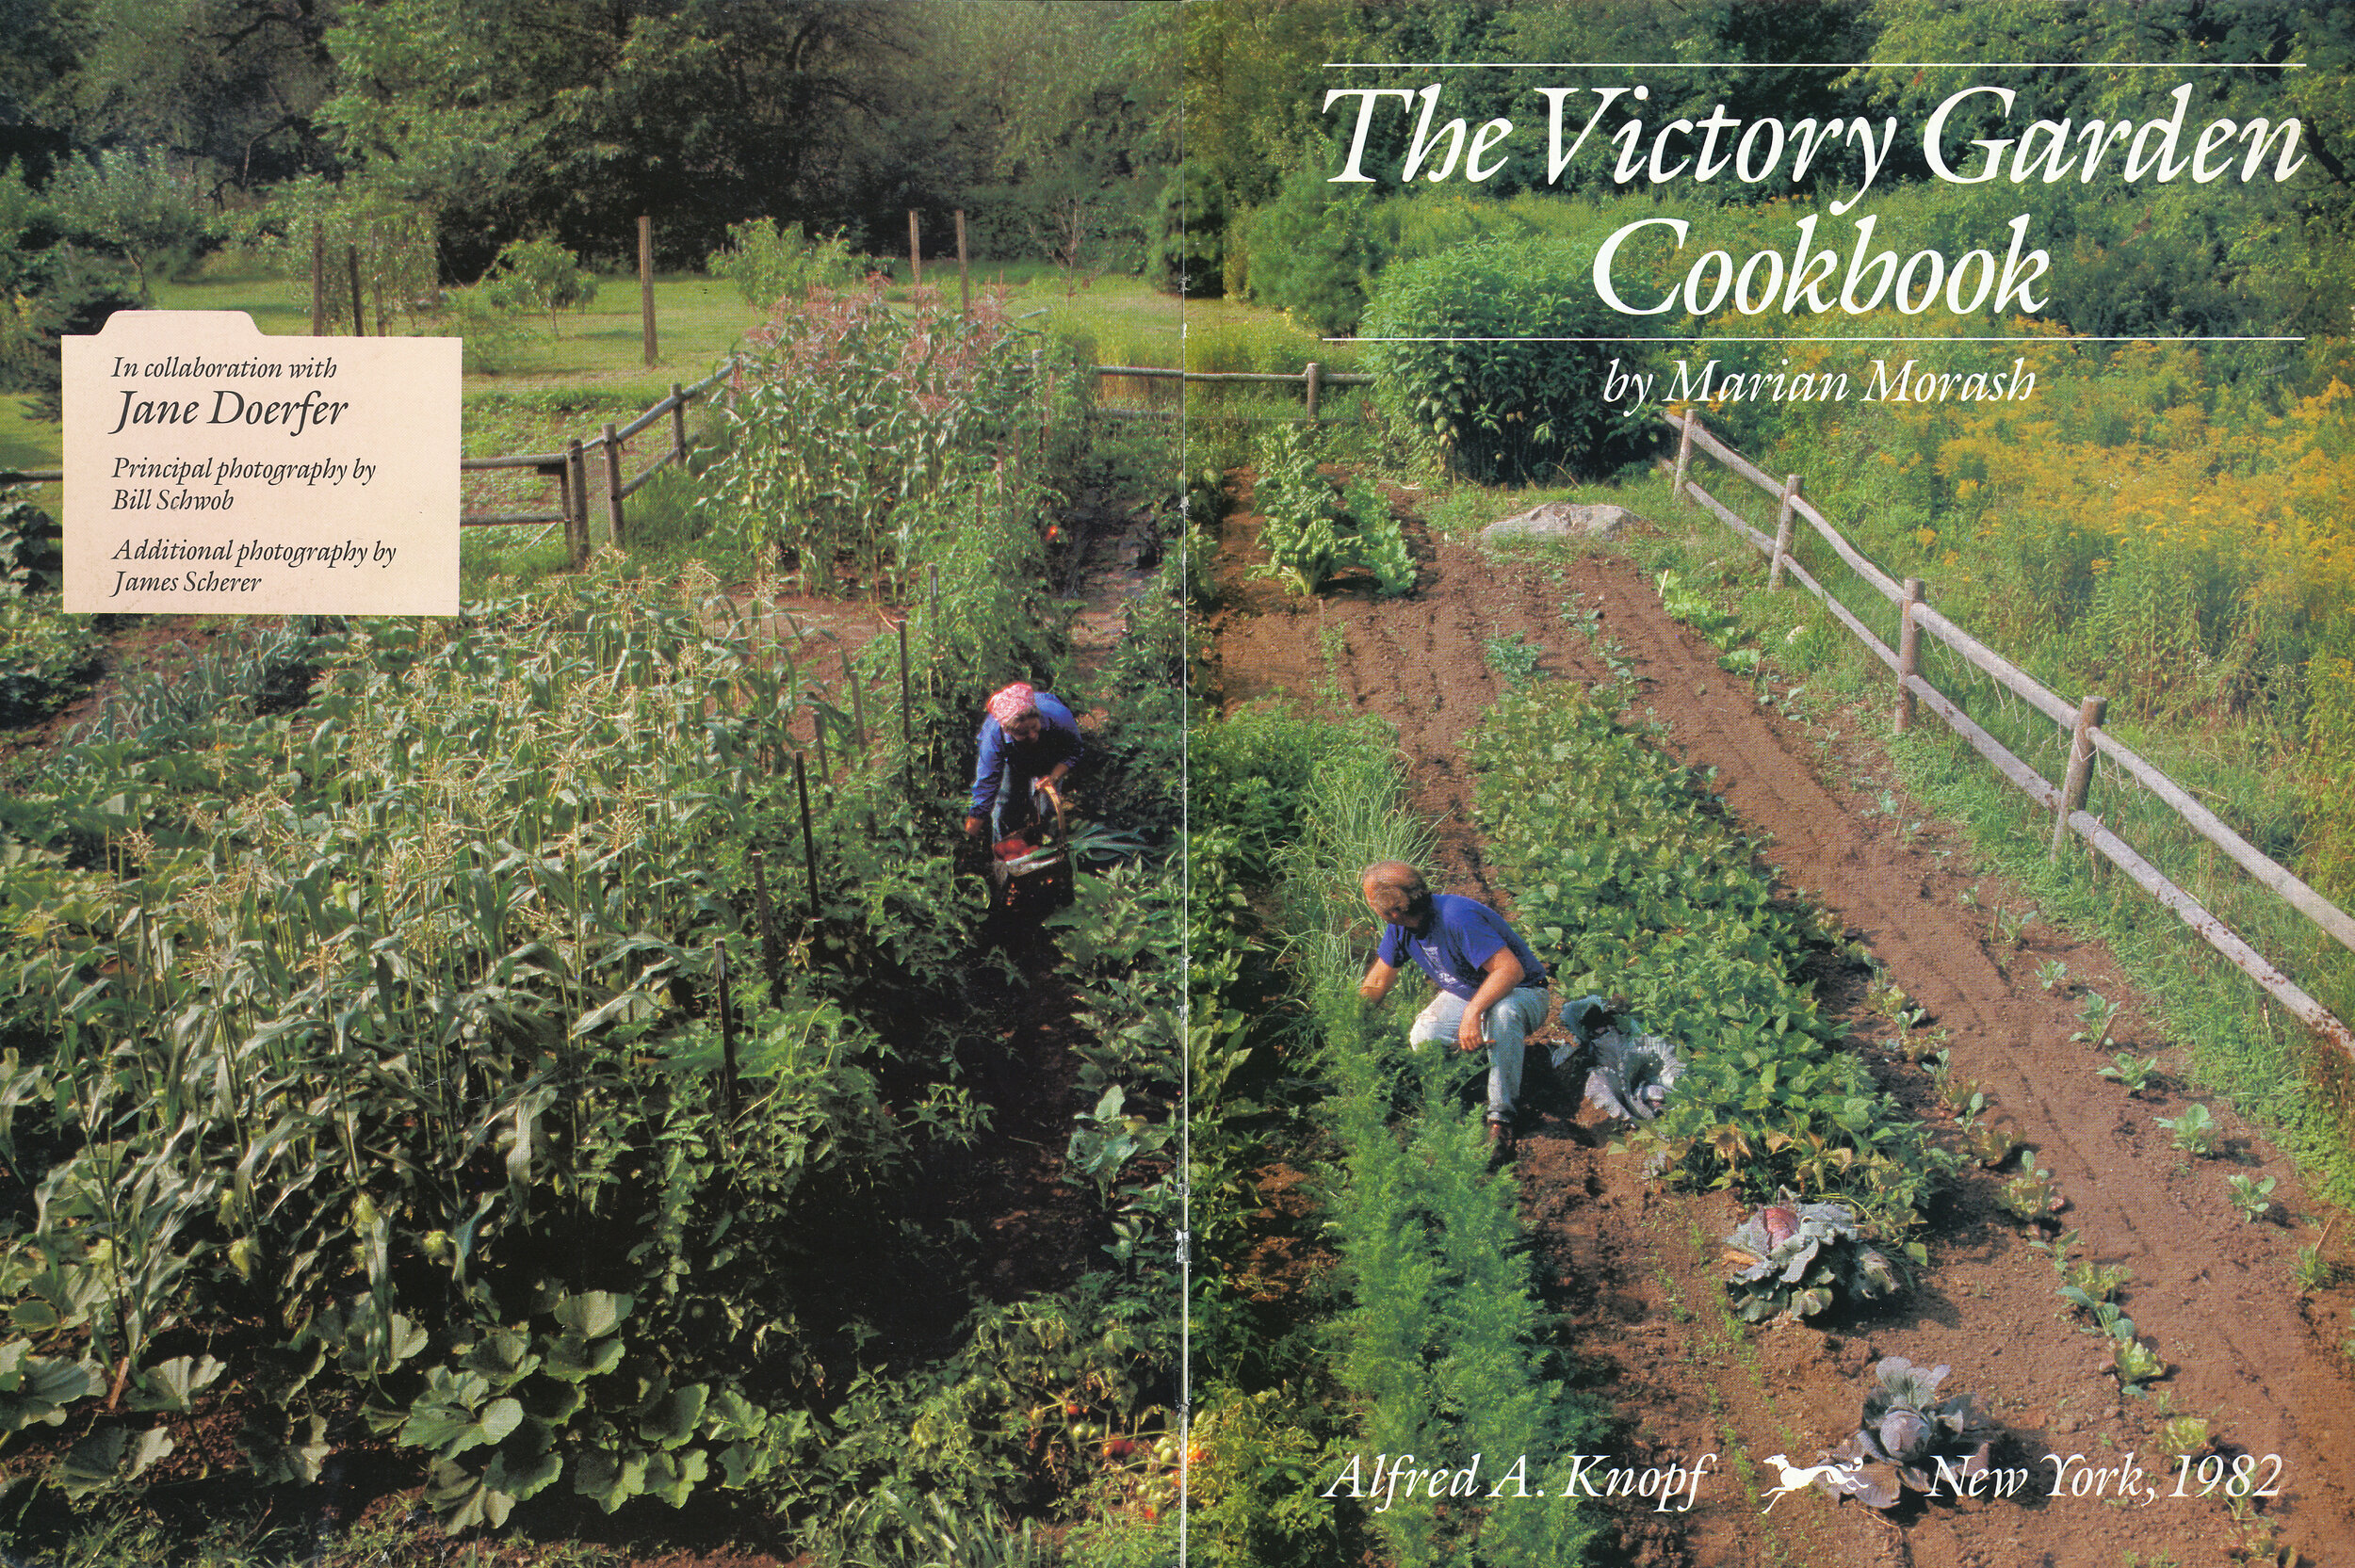 The victory garden at their home outside Boston. From 'The Victory Garden Cookbook', 1982.